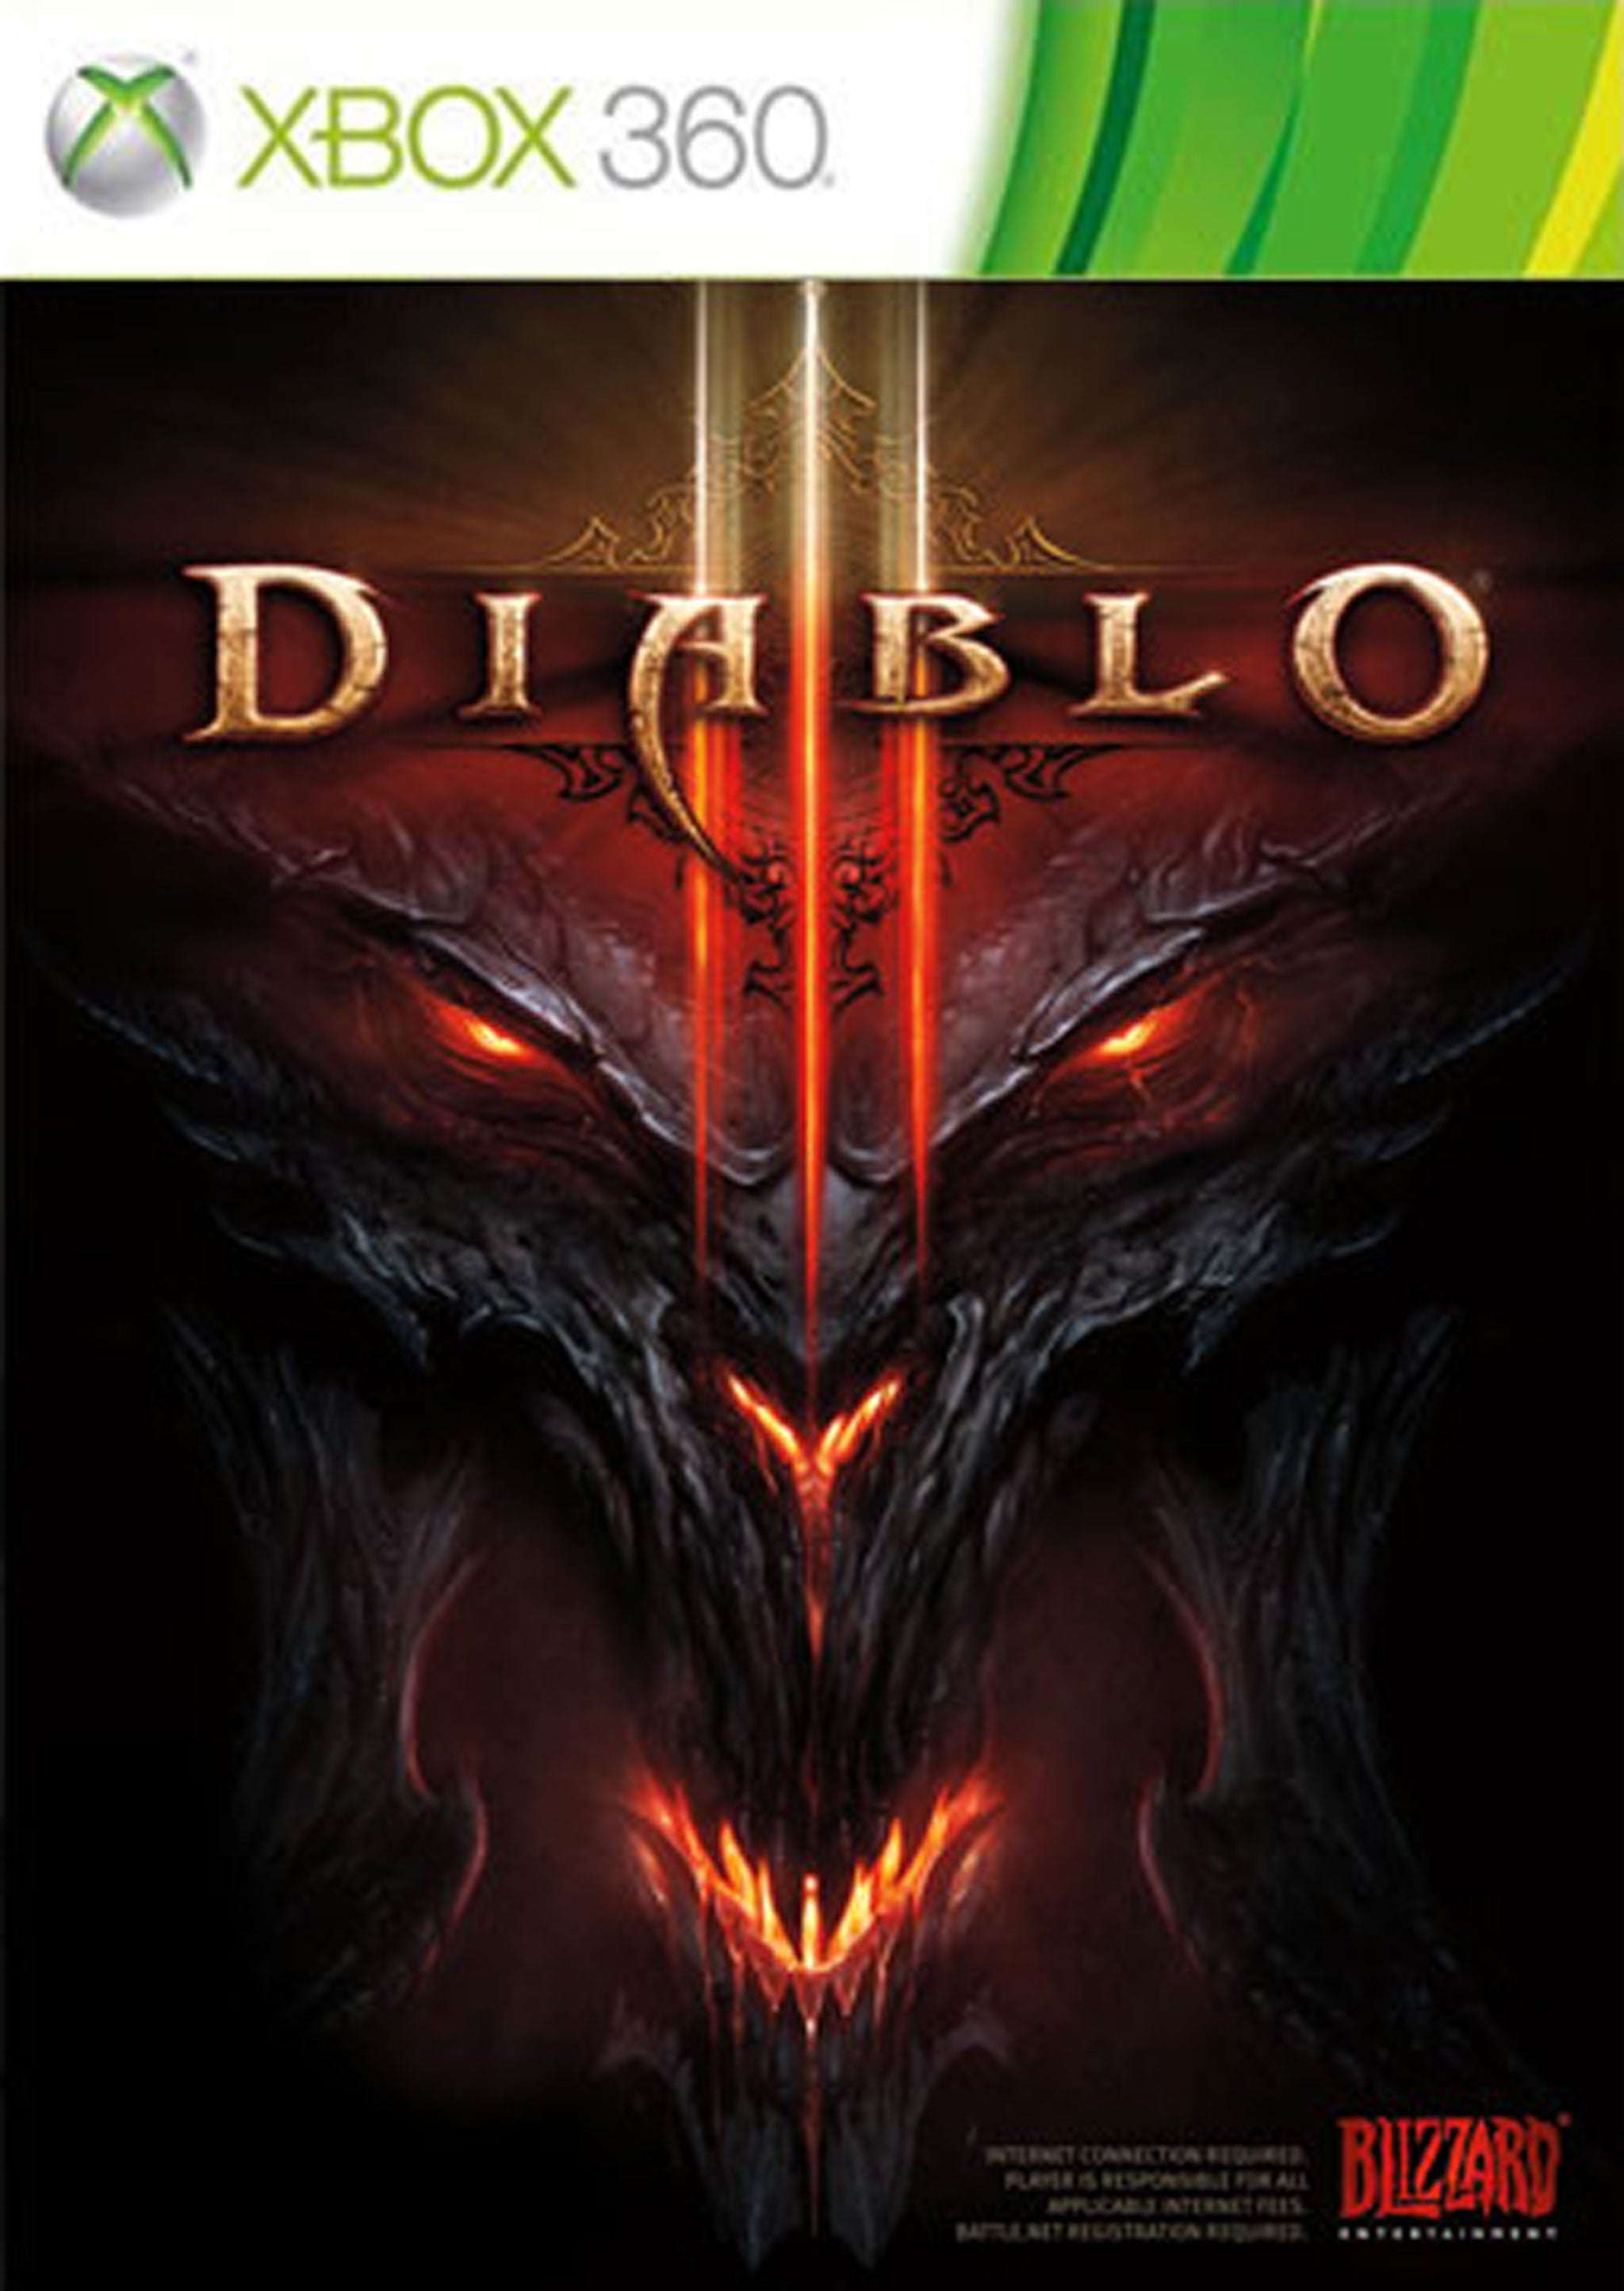 Diablo III set a new record for the fastest-selling PC game ever, clearing 3.5 million copies in the first 24 hours of release